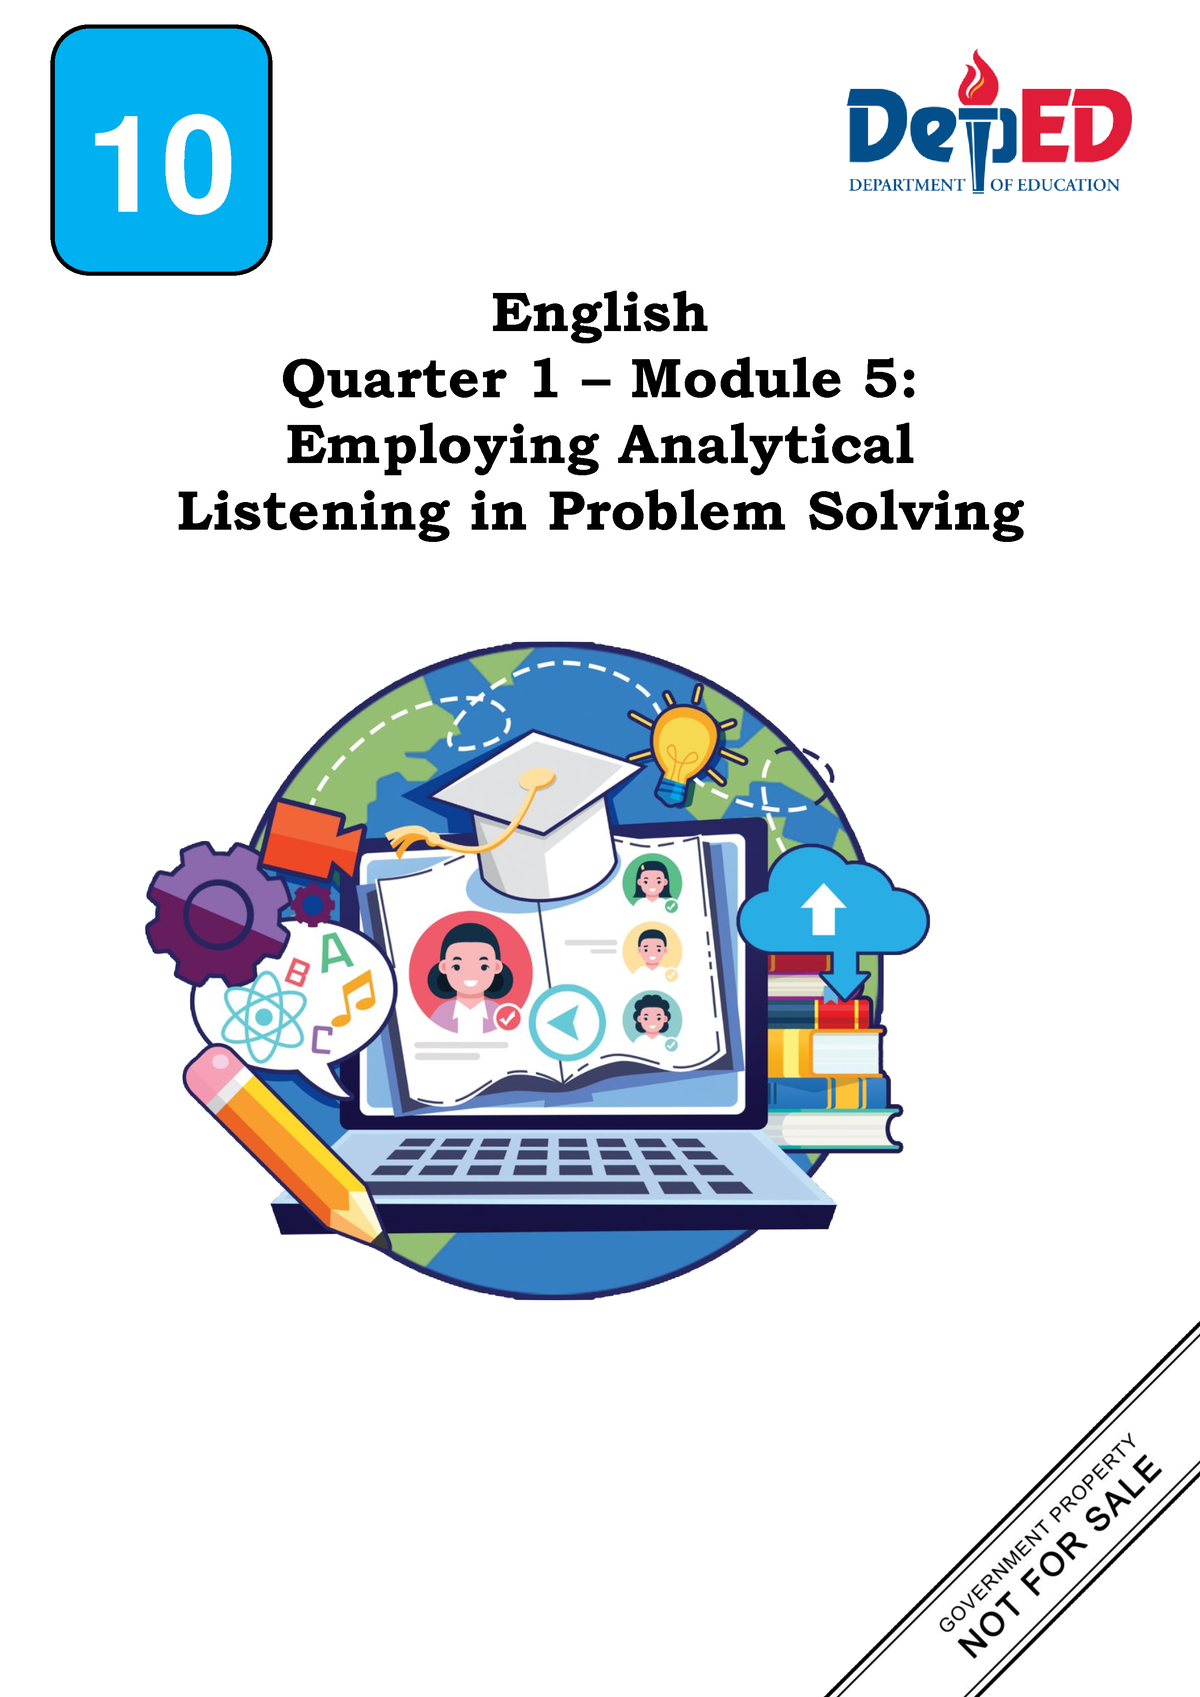 employ analytical listening in problem solving detailed lesson plan